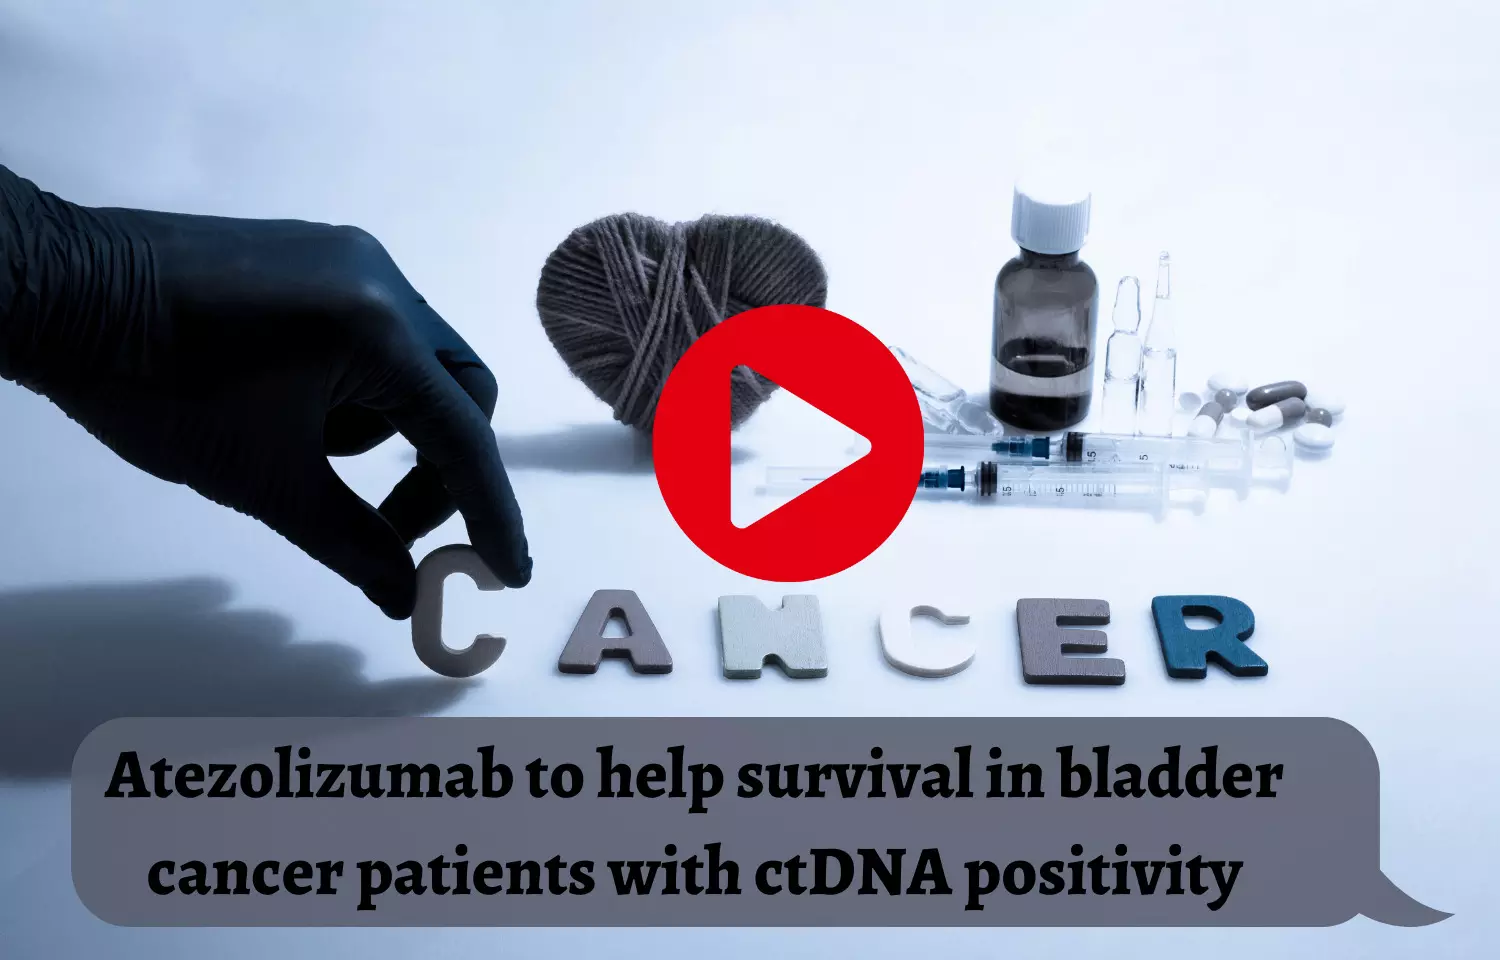 Atezolizumab to help survival in bladder cancer patients with ctDNA positivity